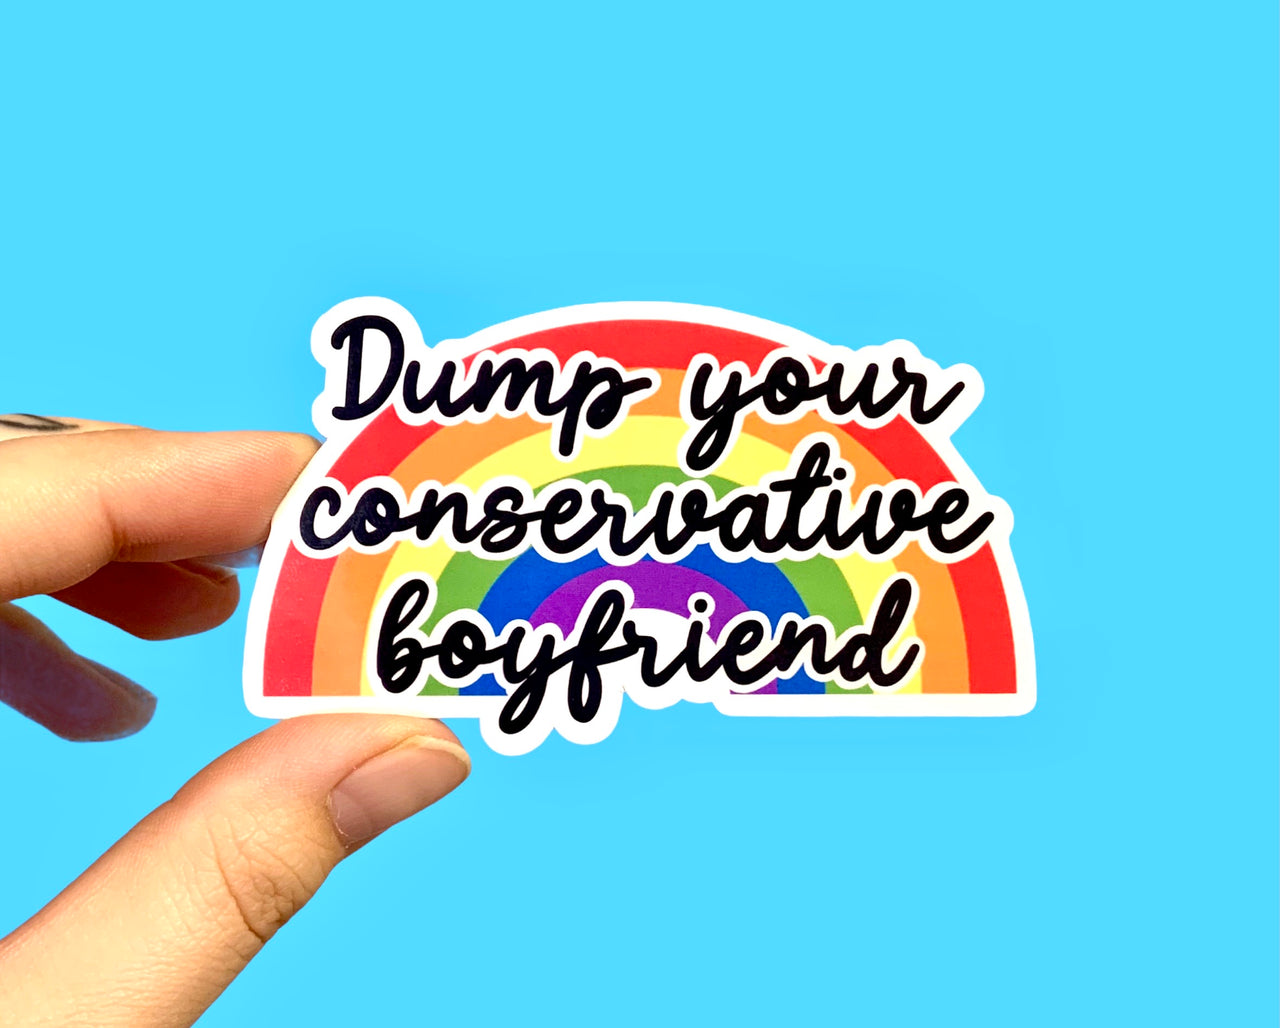 Dump your conservative boyfriend (pack of 3 or 5 stickers)